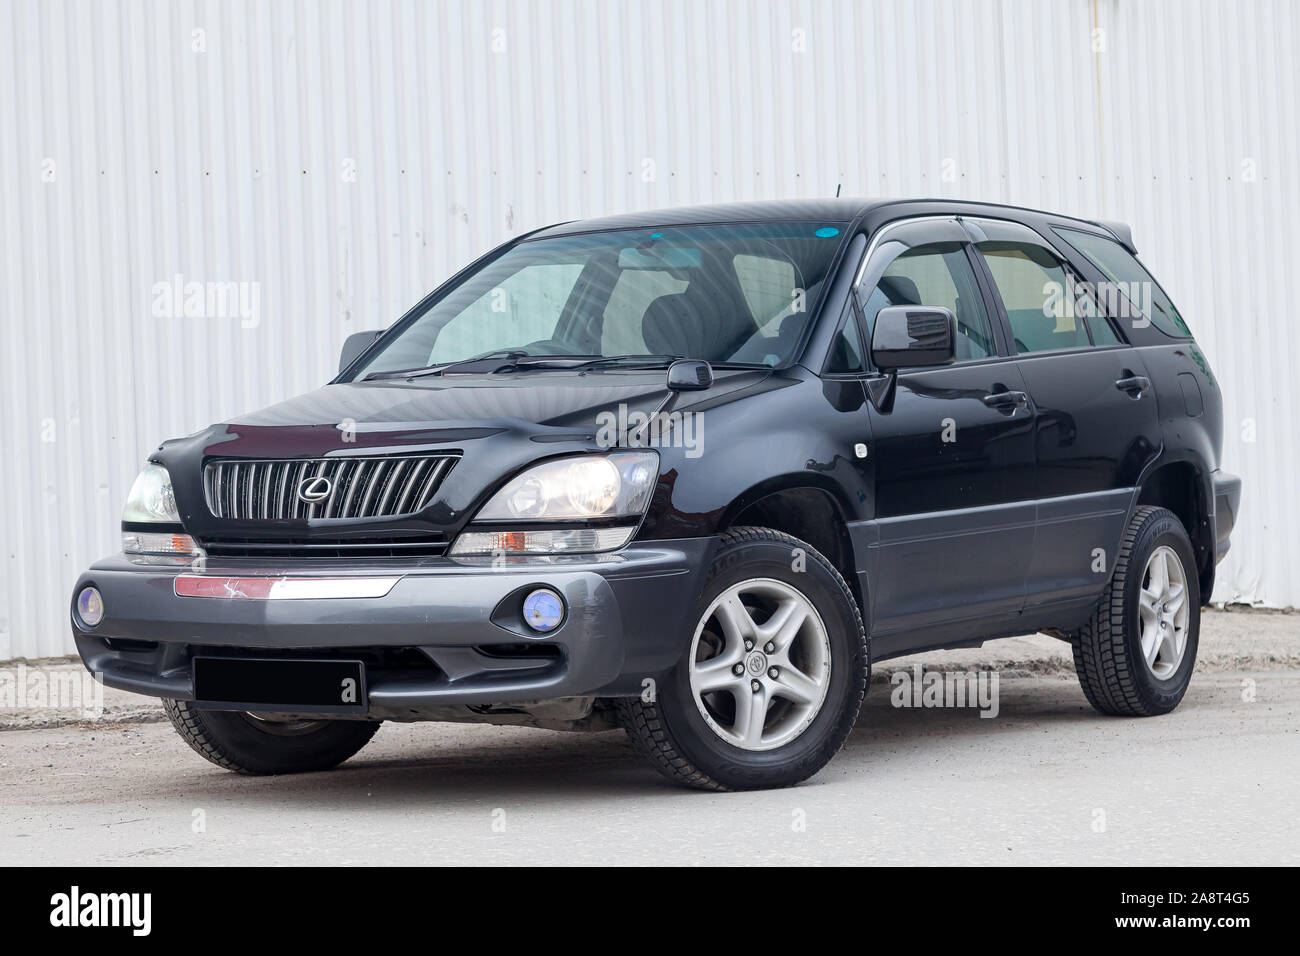 Novosibirsk, Russia - 11.05.2019: Black Toyota Harrier or Lexus RX300 1997 year front view with gray interior in excellent condition in a parking spac Stock Photo